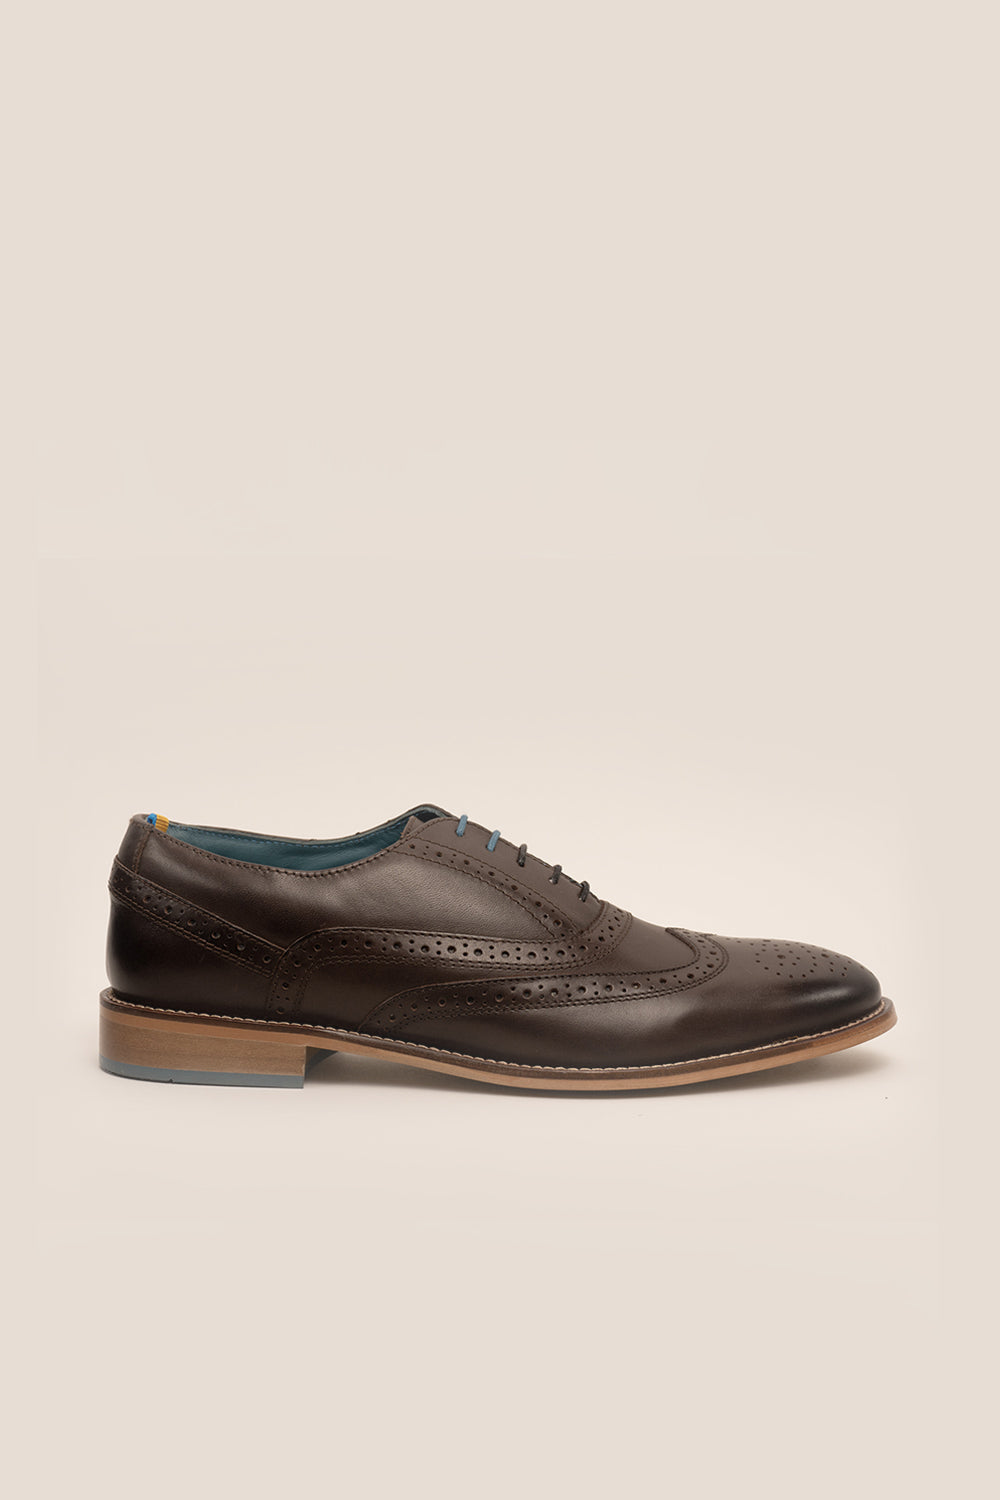 Winston Men’s Shoes Brown | Leather Oxford Brogues | Oswin Hyde – OSWIN ...